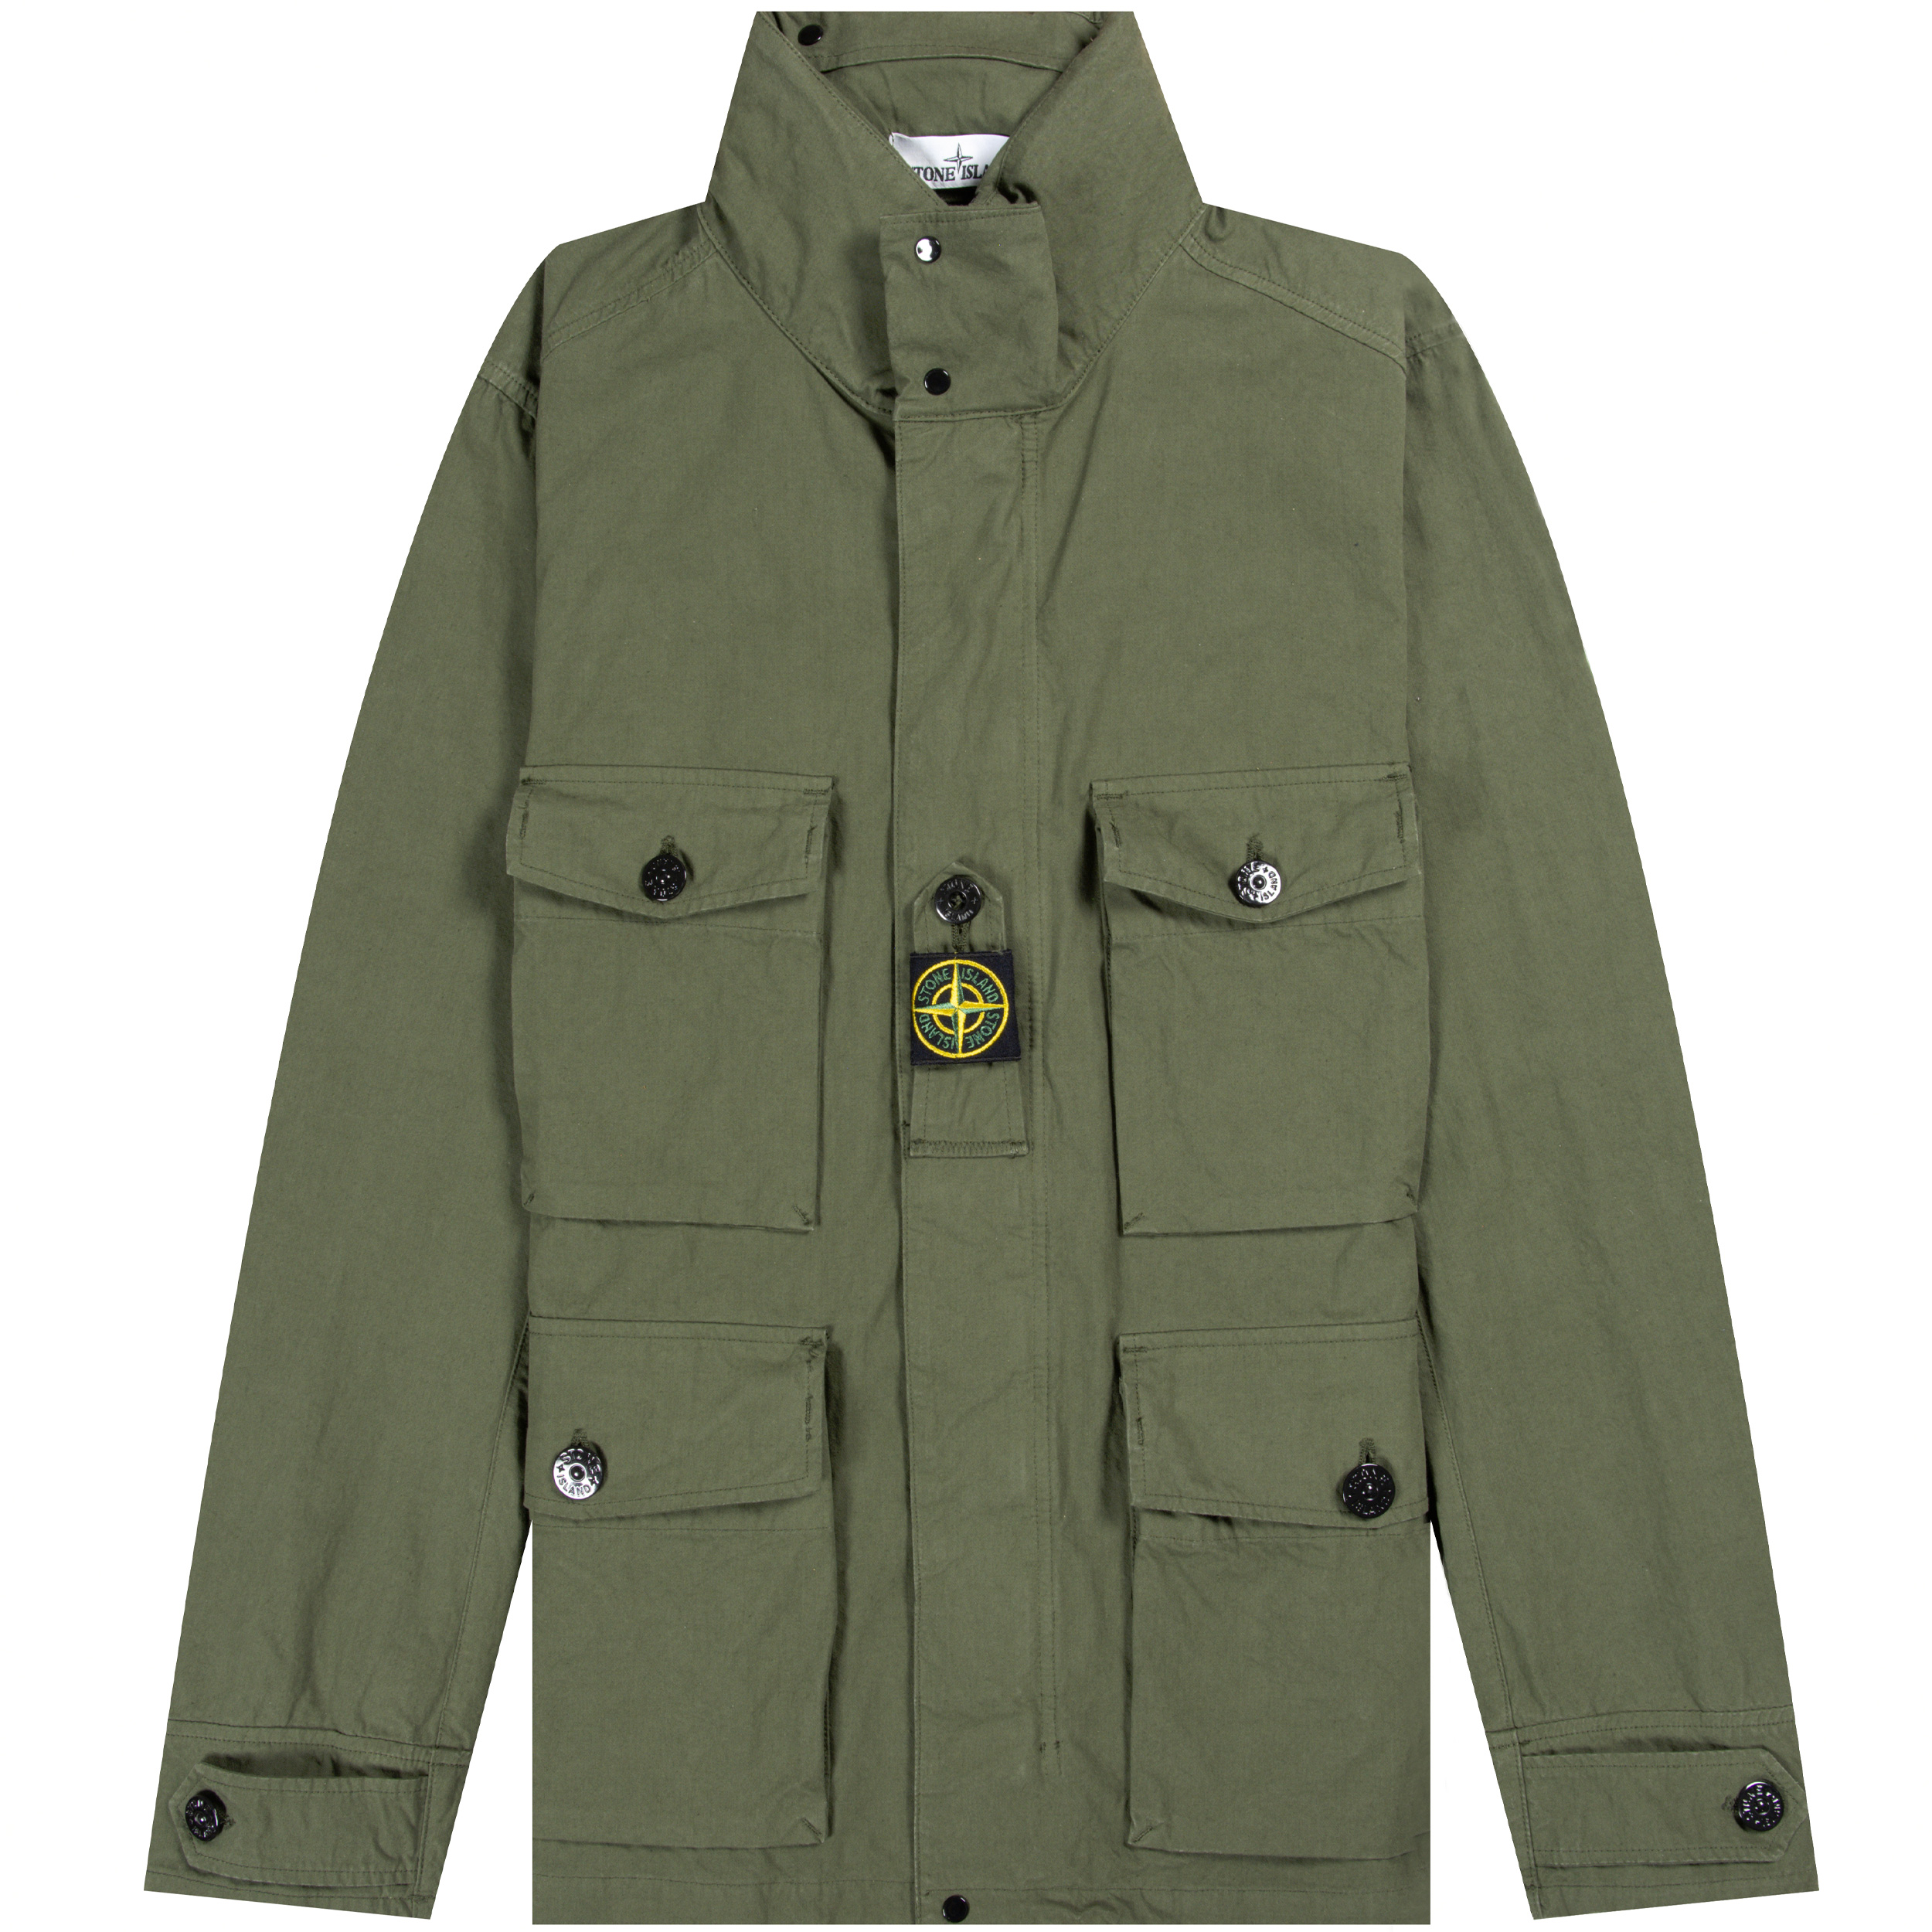 Stone Island 'Field Jacket' With Chest Pockets Olive